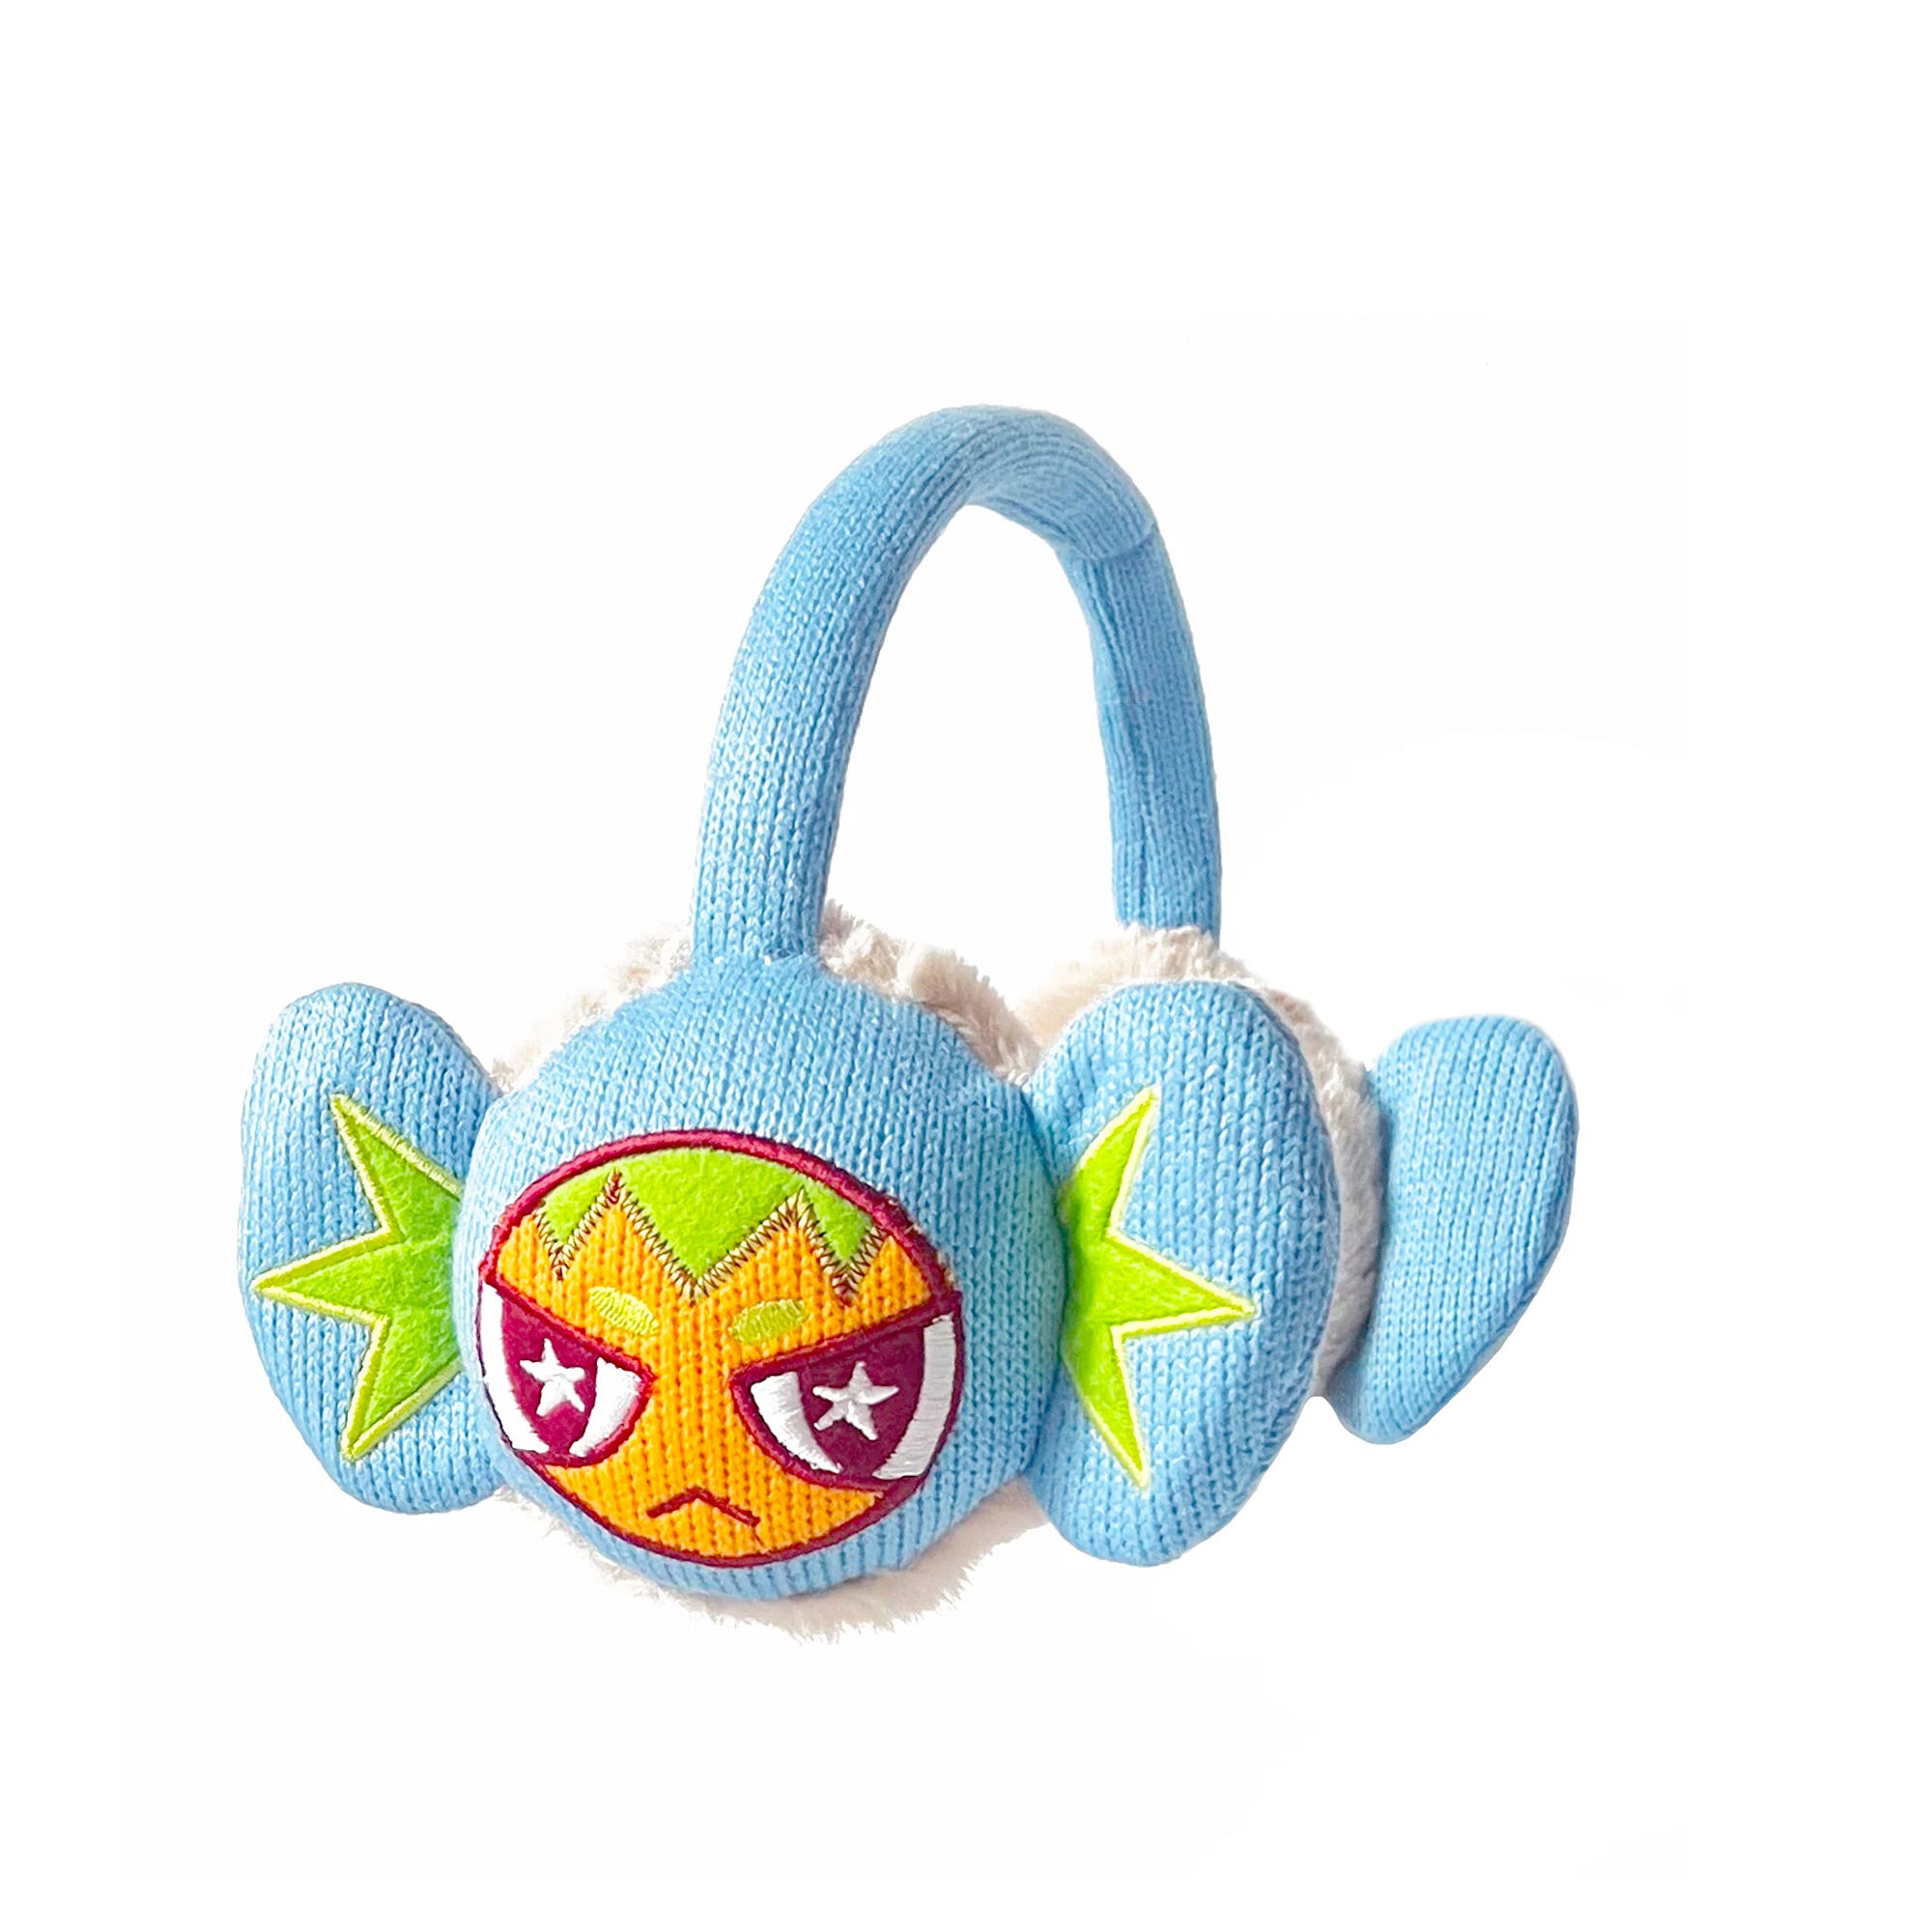 The HAPPY 99 - REM EARMUFFS BLUE available online with global shipping, and in PAM Stores Melbourne and Sydney.